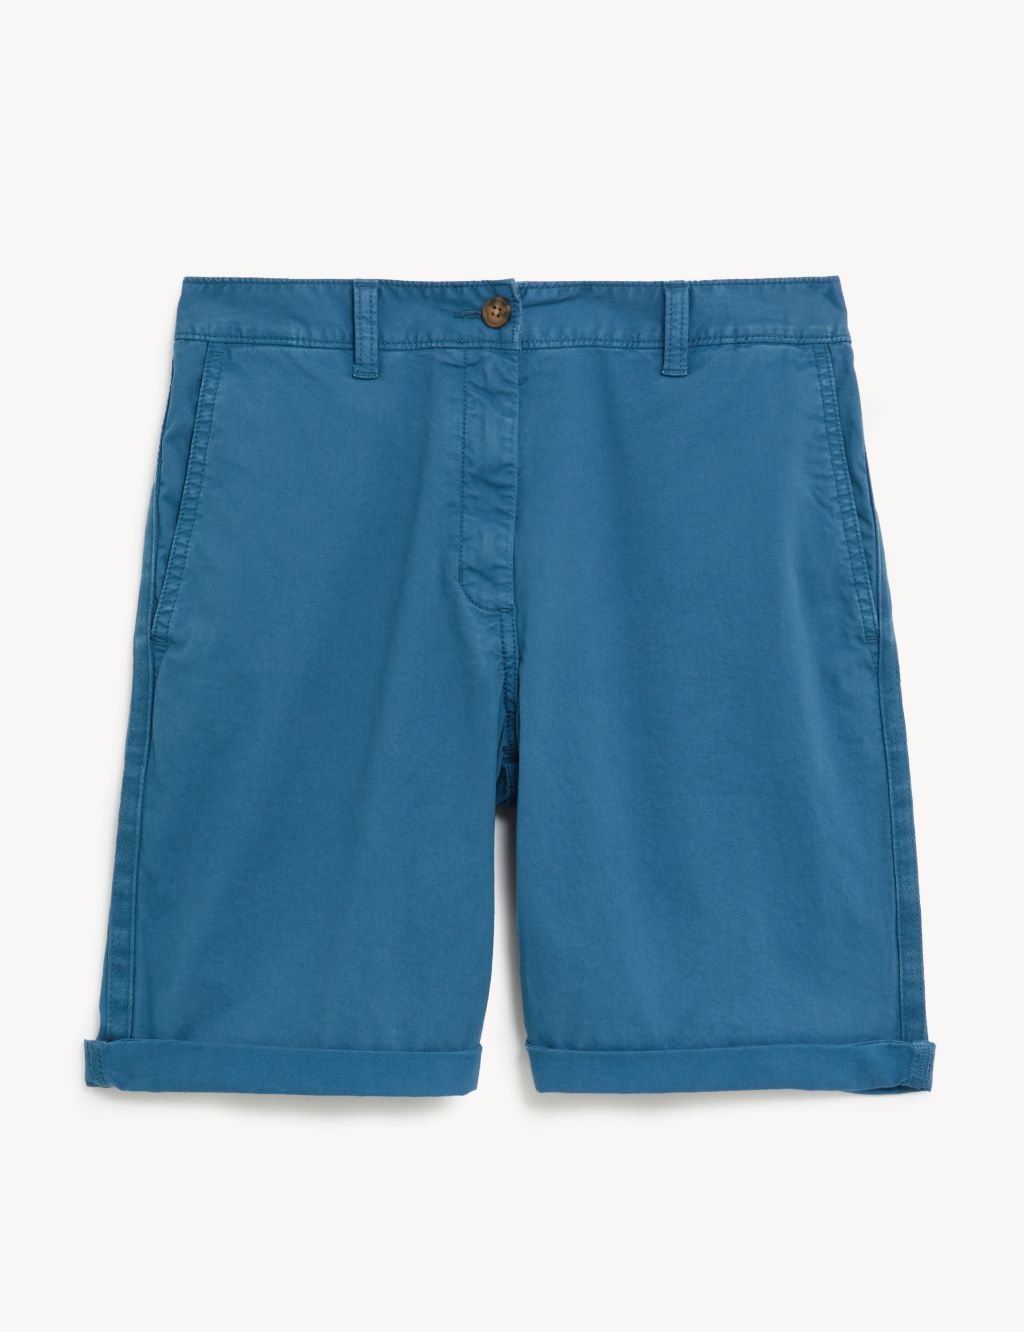 Cotton Rich Tea Dyed Chino Shorts image 2